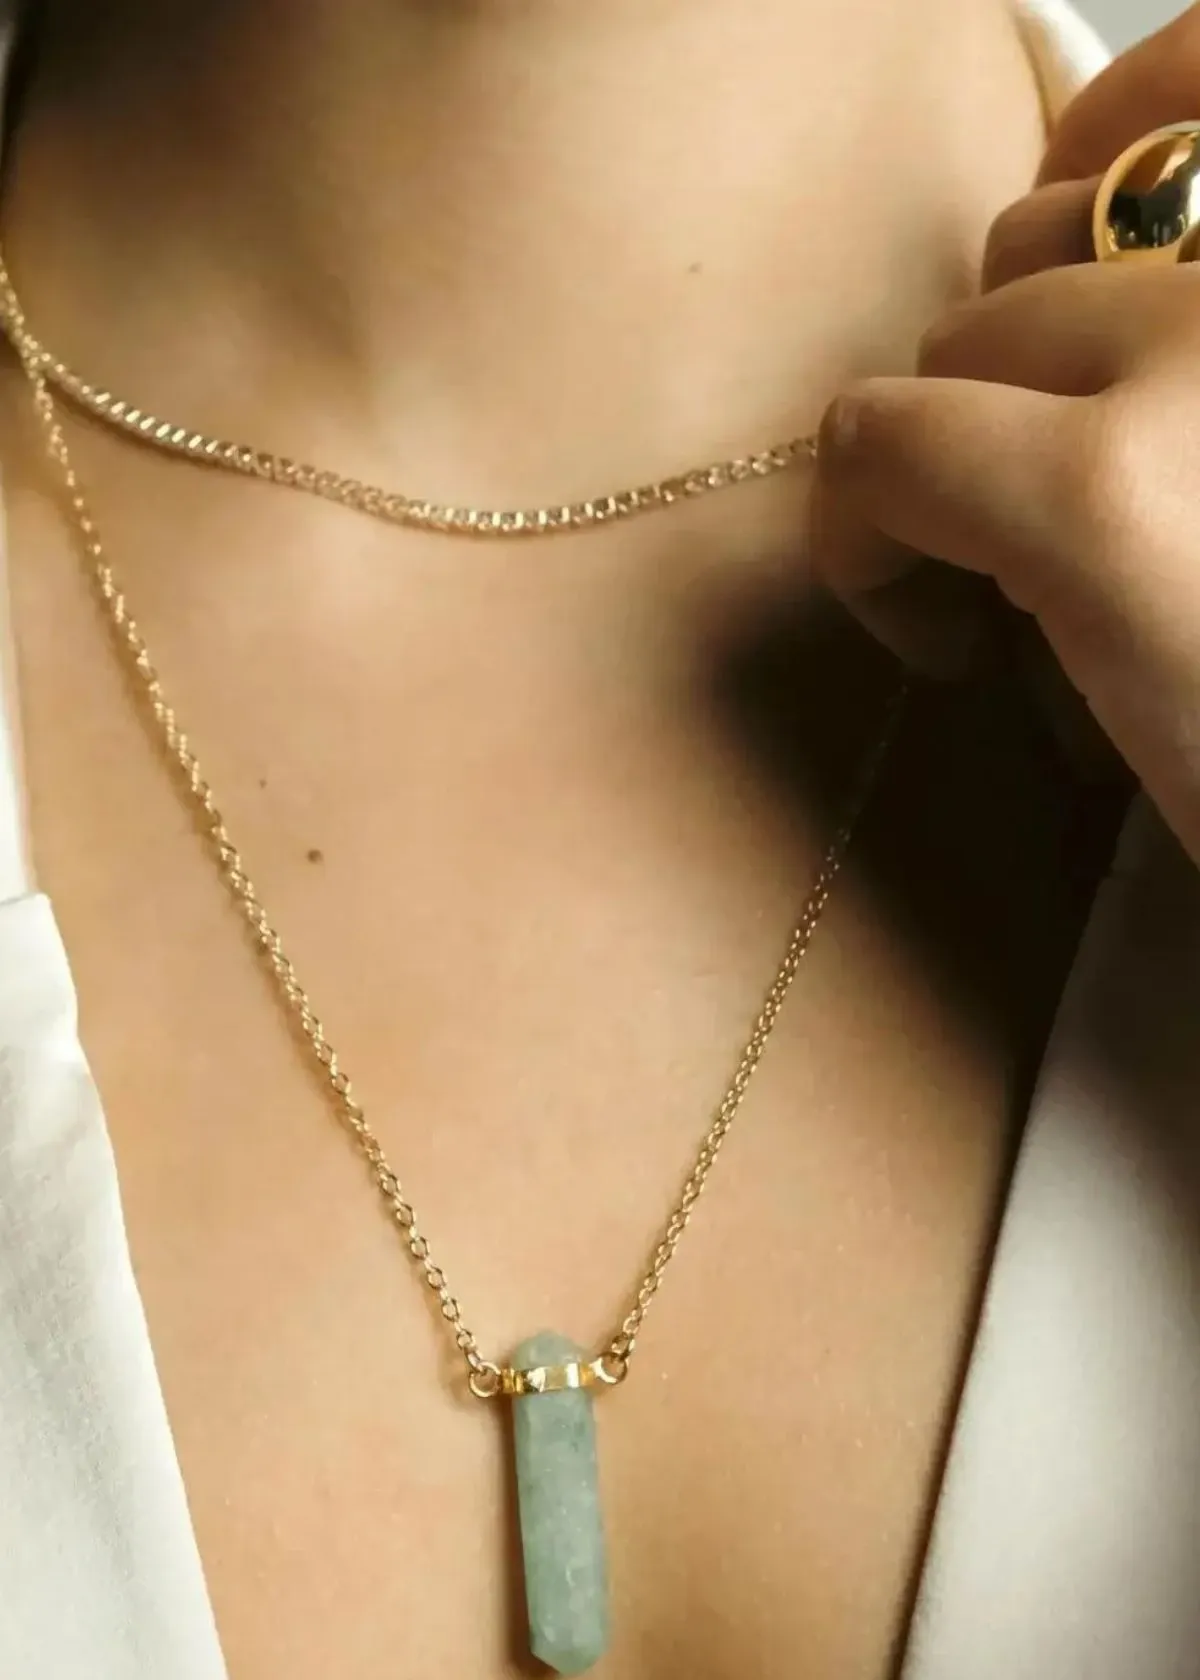 How to Choose the Right Amazonite Necklace?